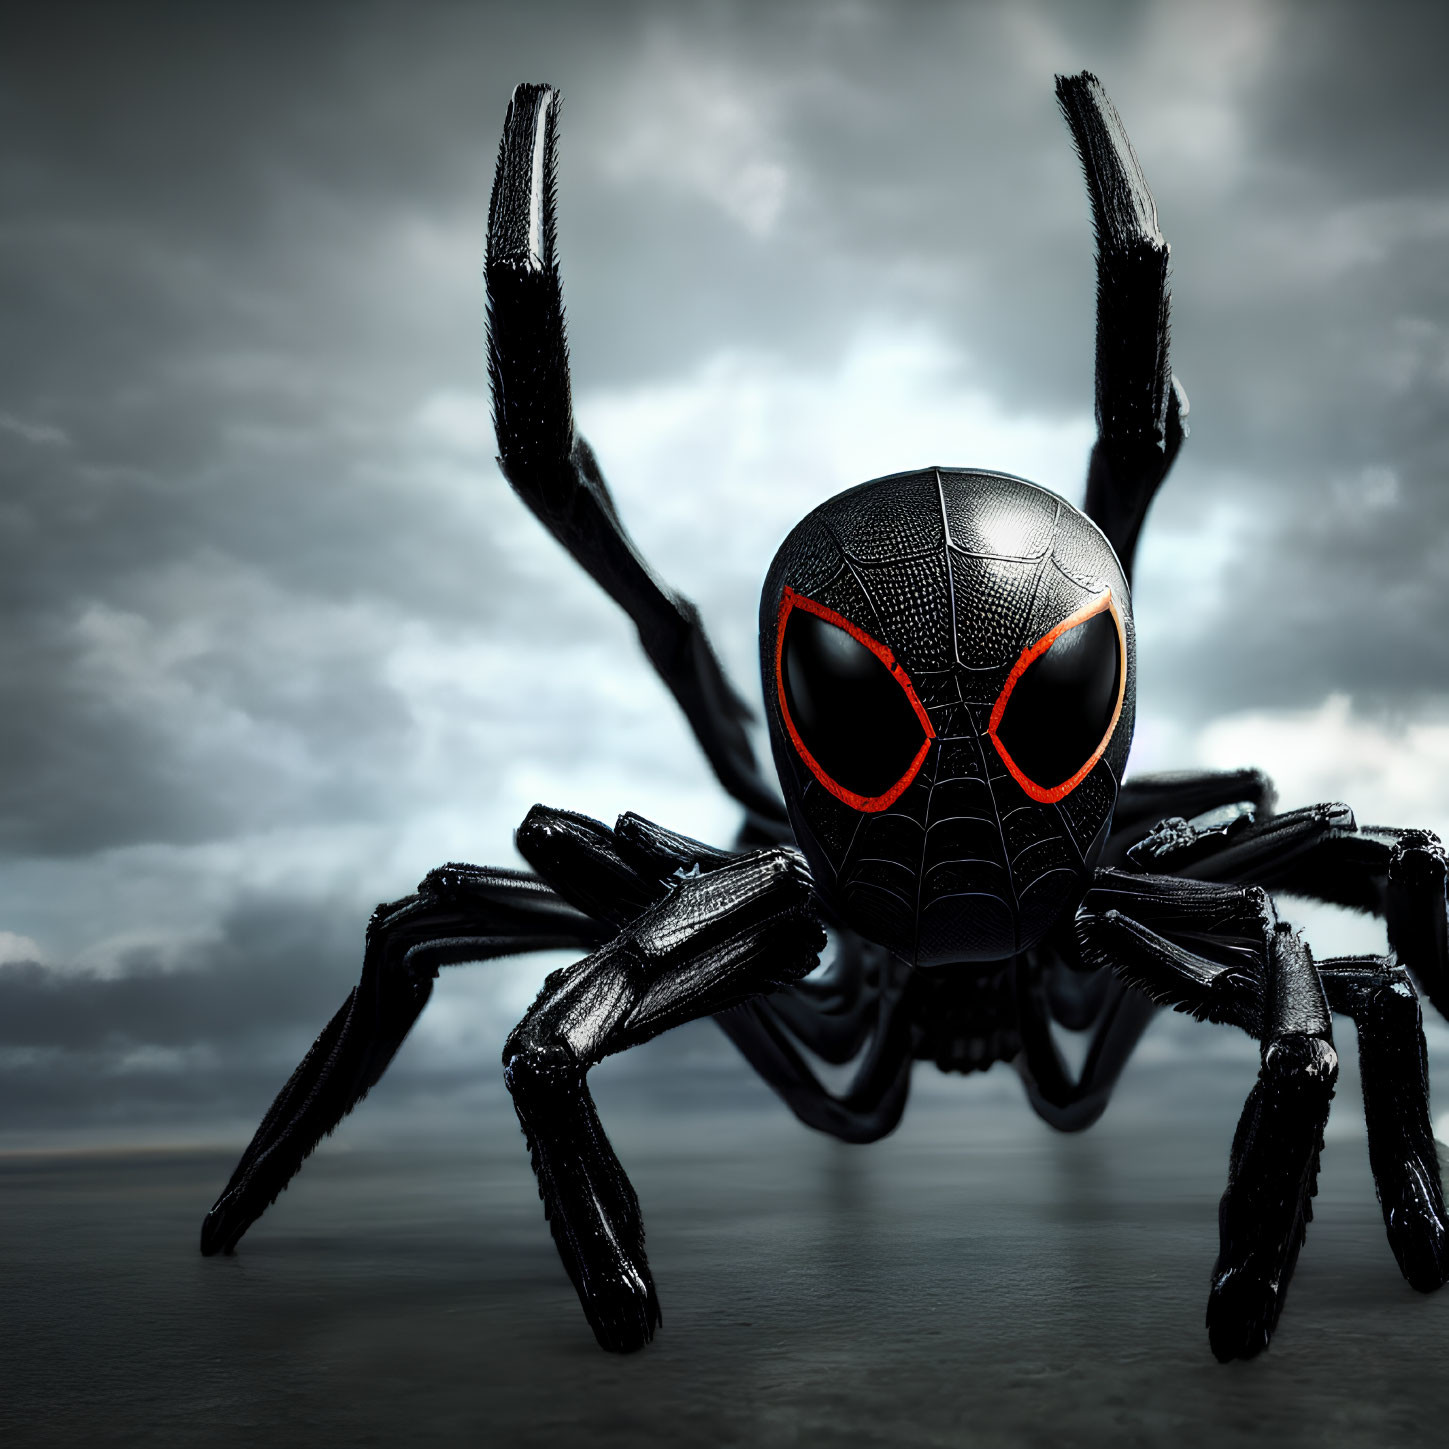 Stylized black spider with red eye markings on gloomy sky backdrop